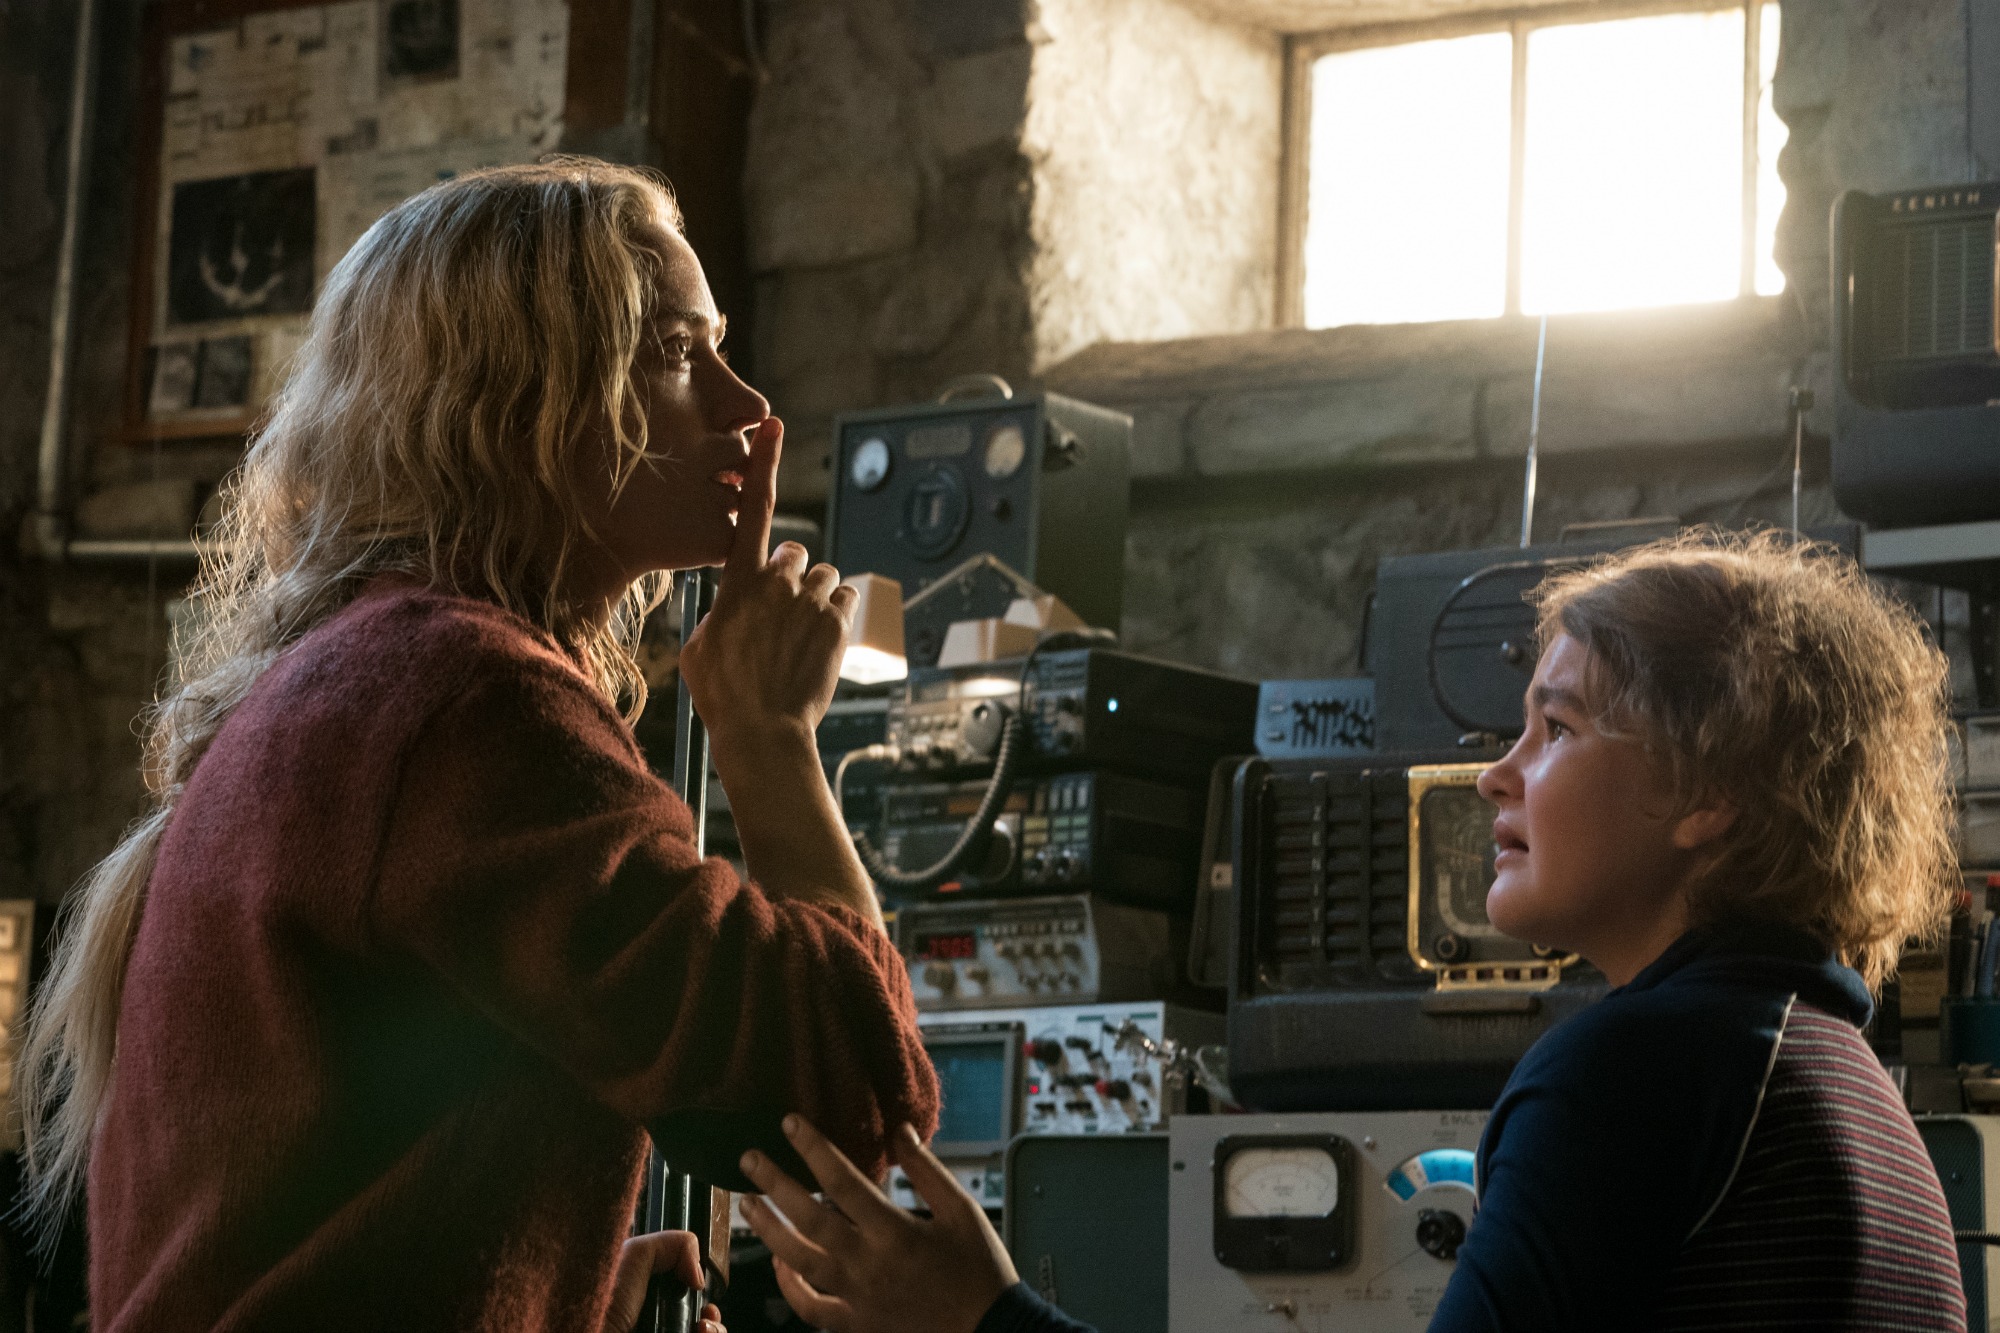 A Quiet Place is A Boldly Catholic, Beautiful "Horror" Film